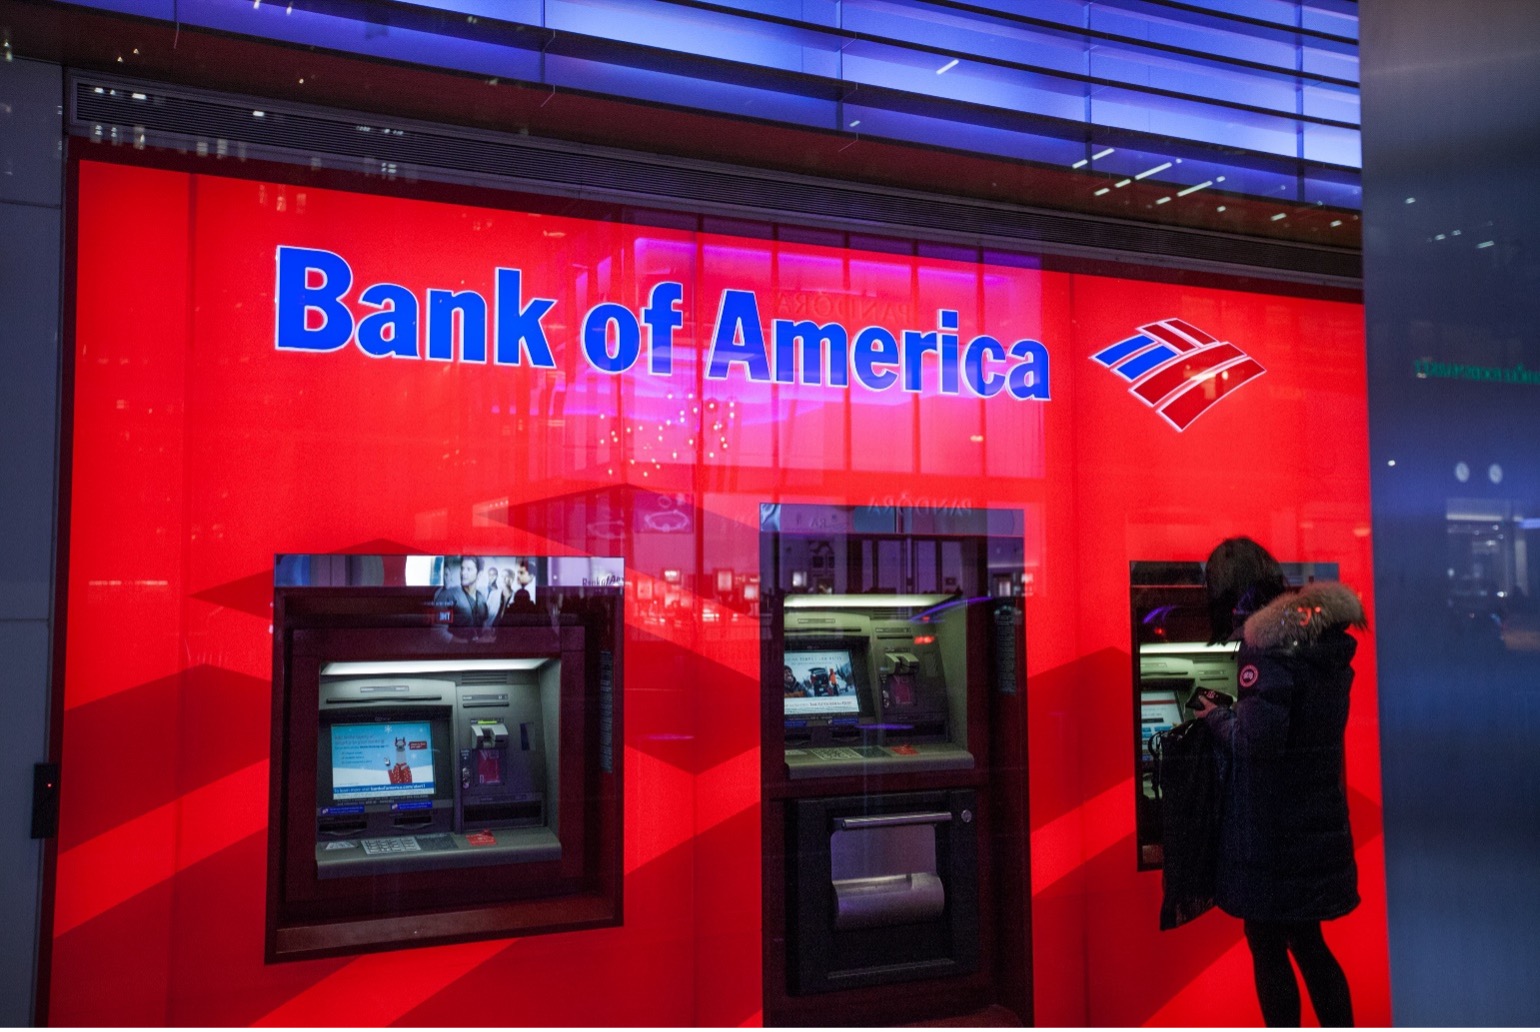 Are Bank of America Business Loans Worth It?